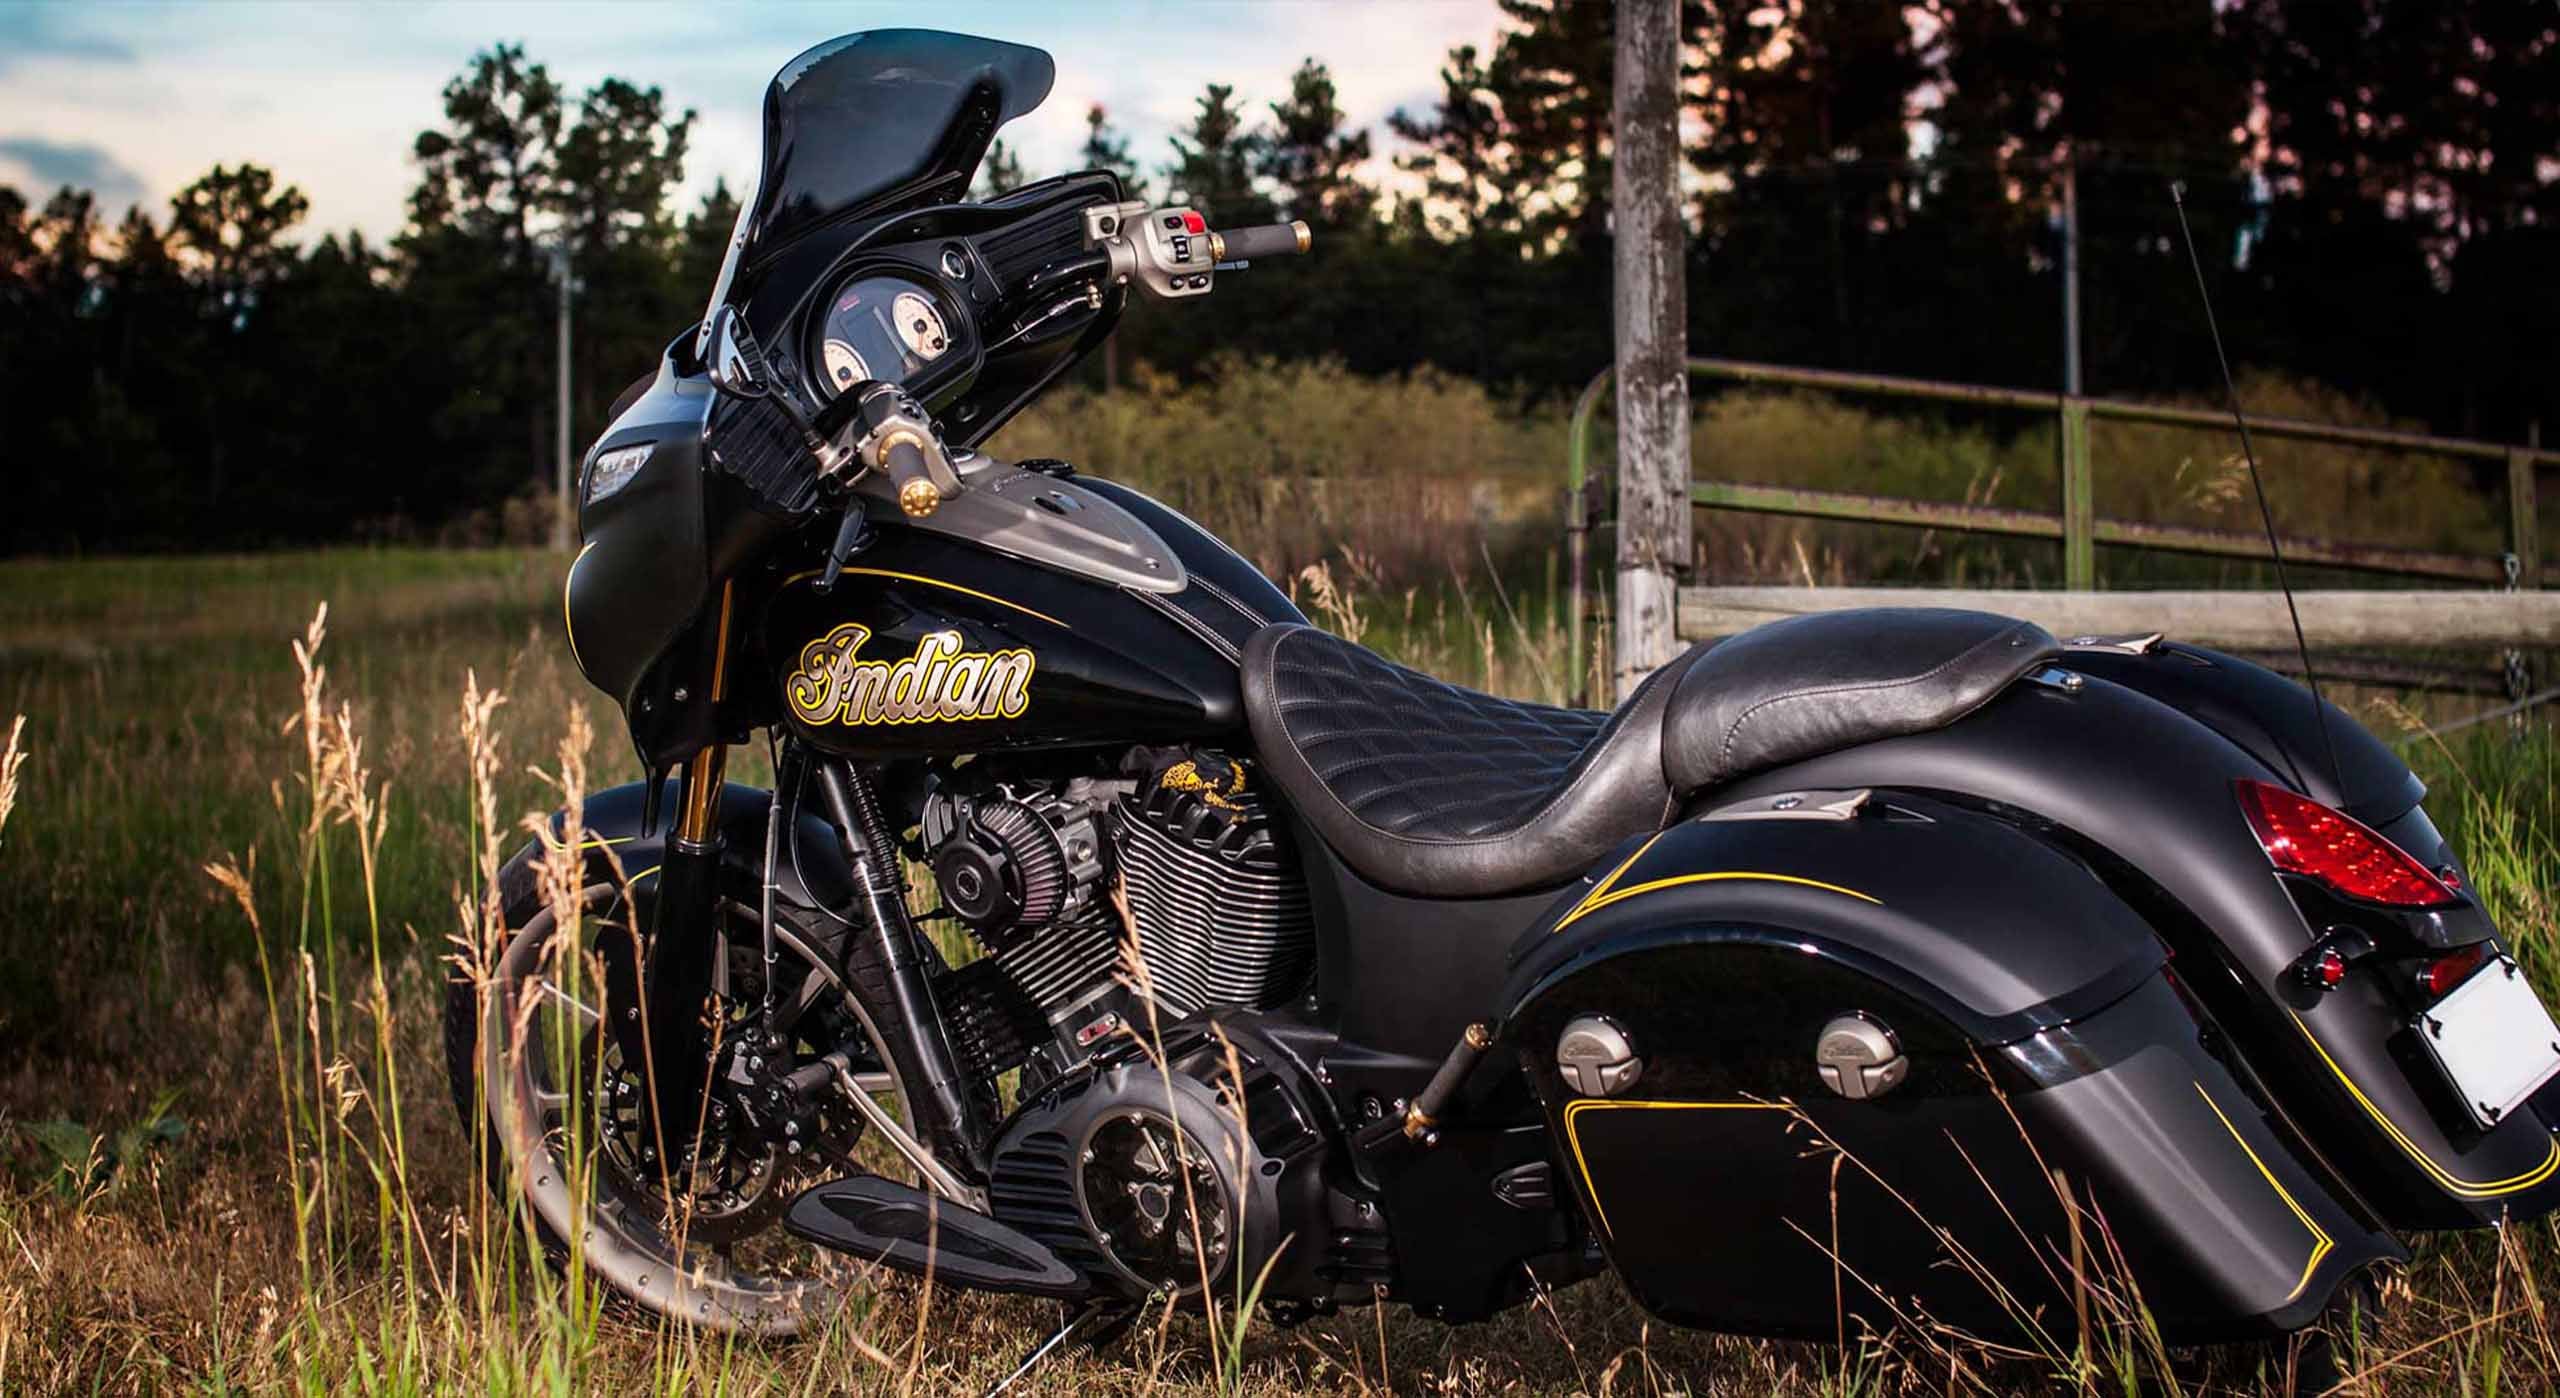 2015 Indian Chieftain by Justyn Amstutz